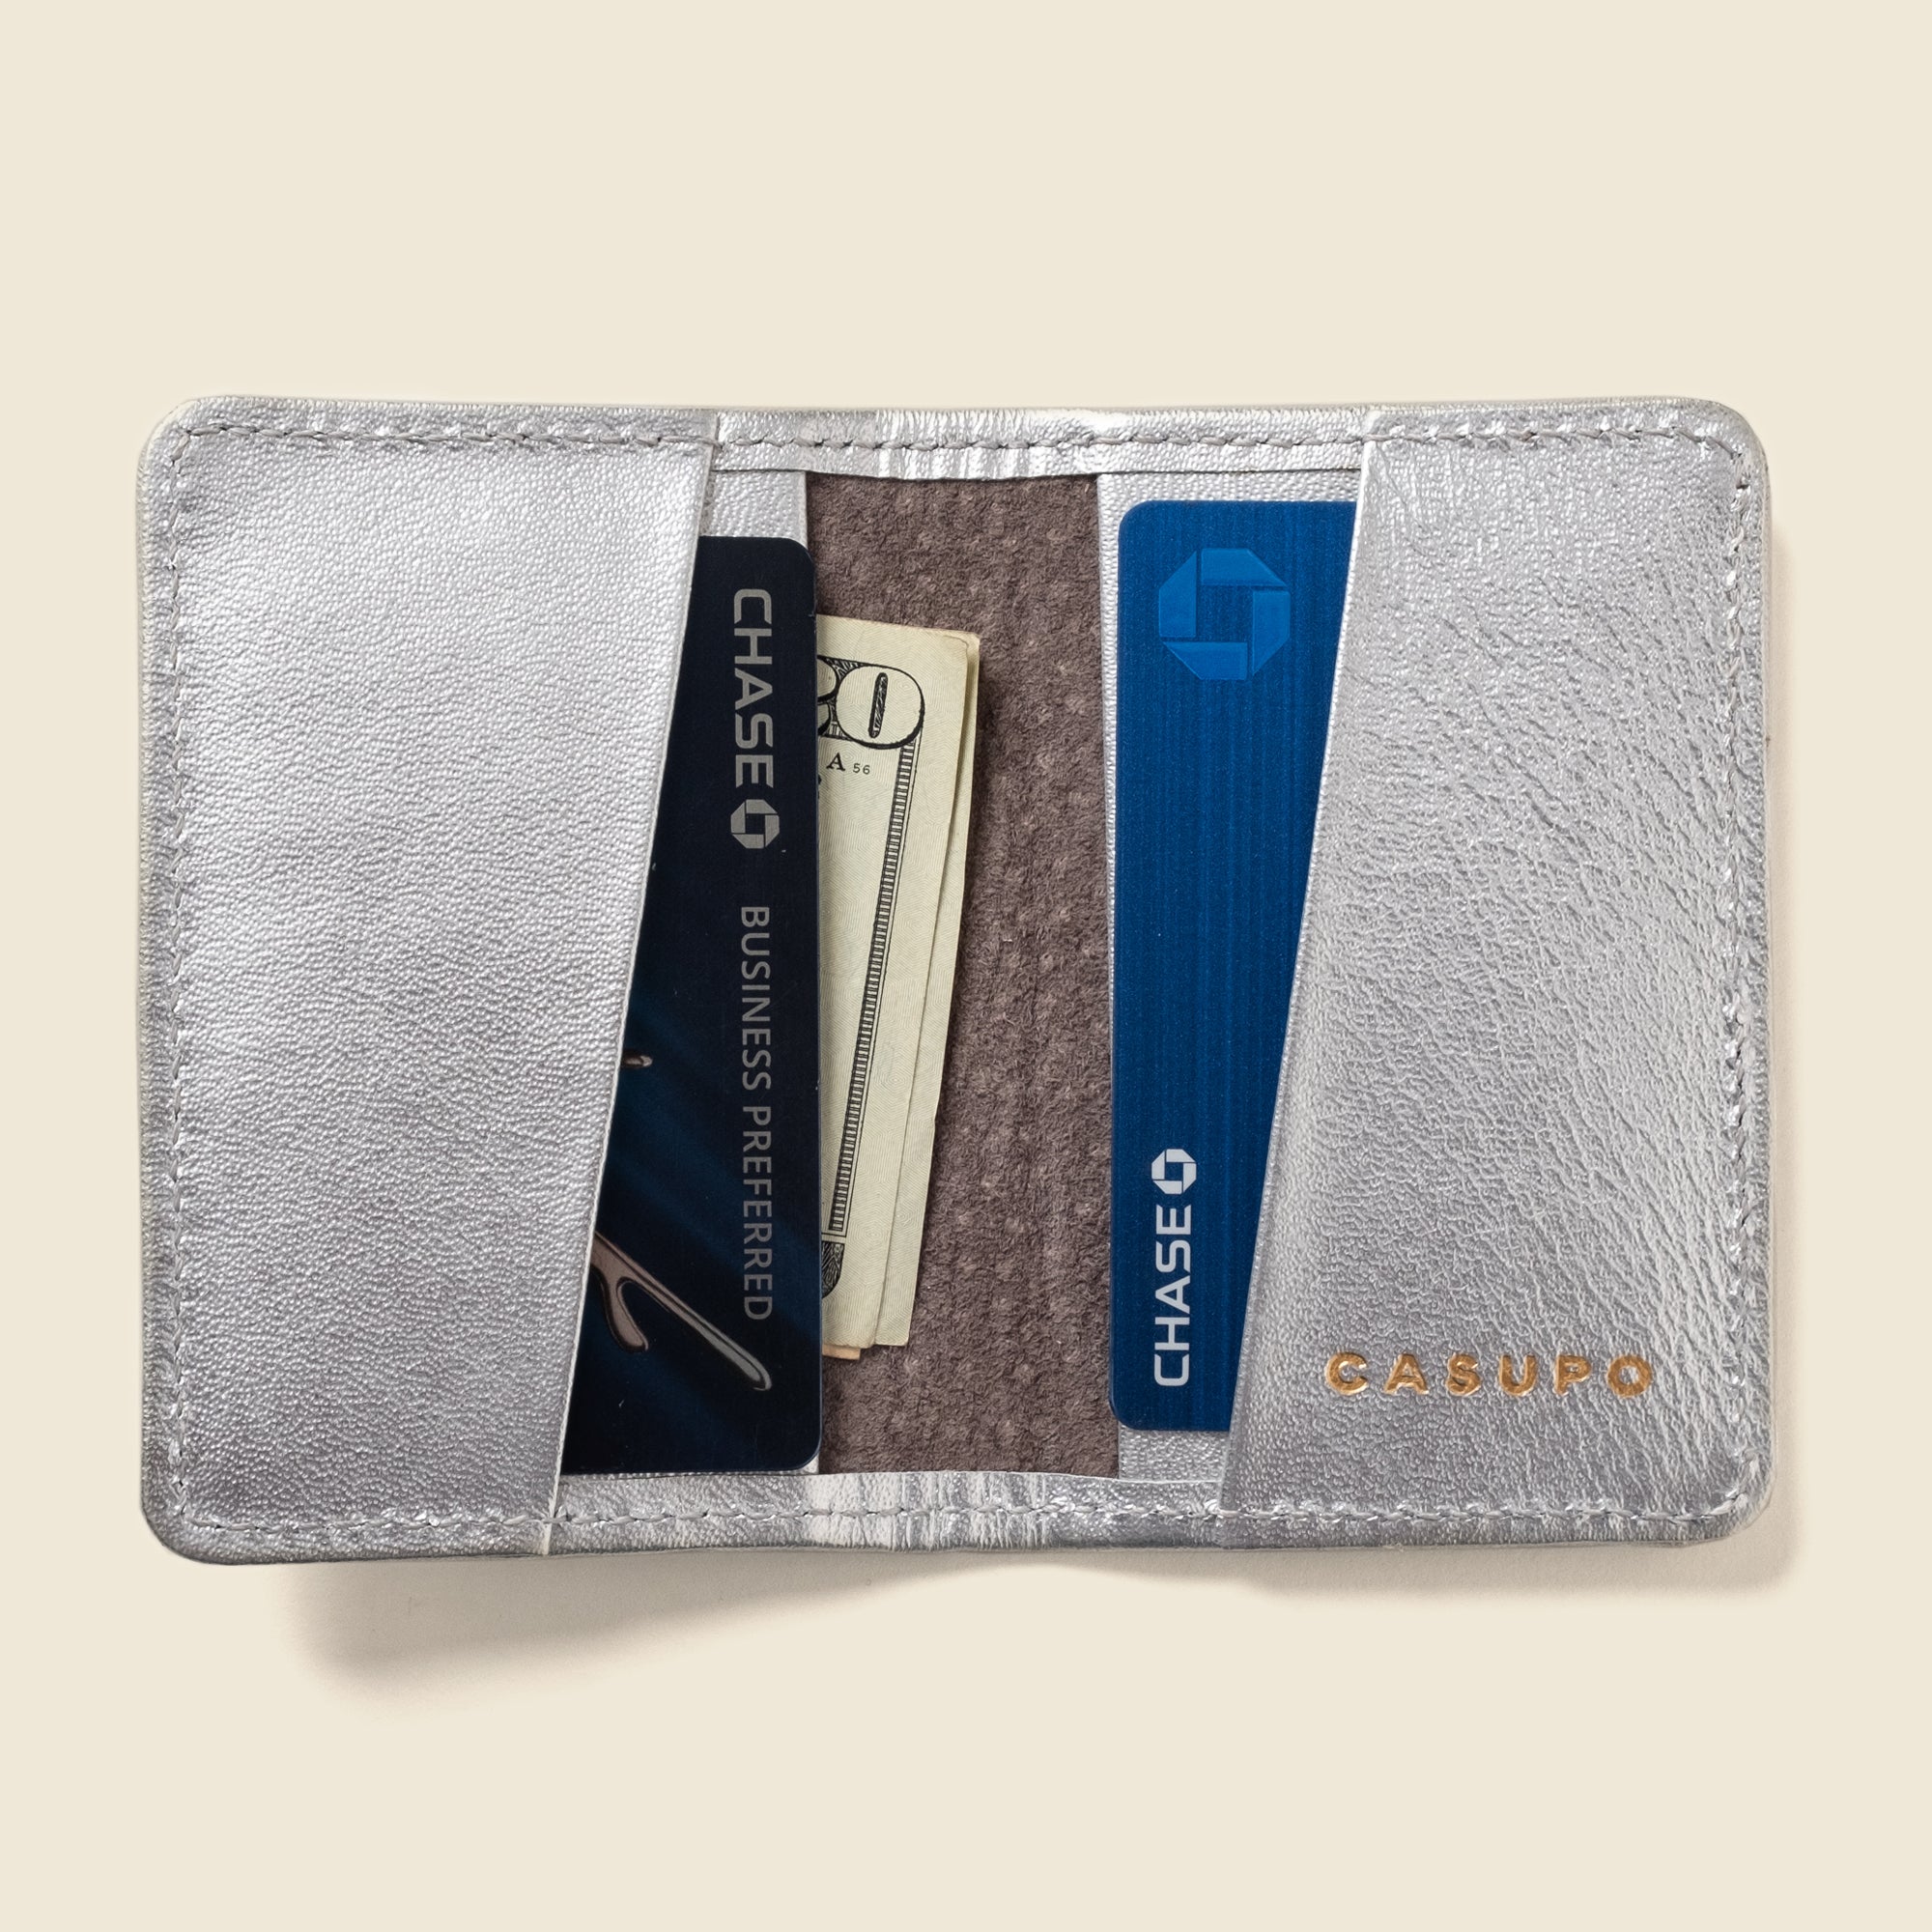 Silver leather bifold wallet from Casupo for men